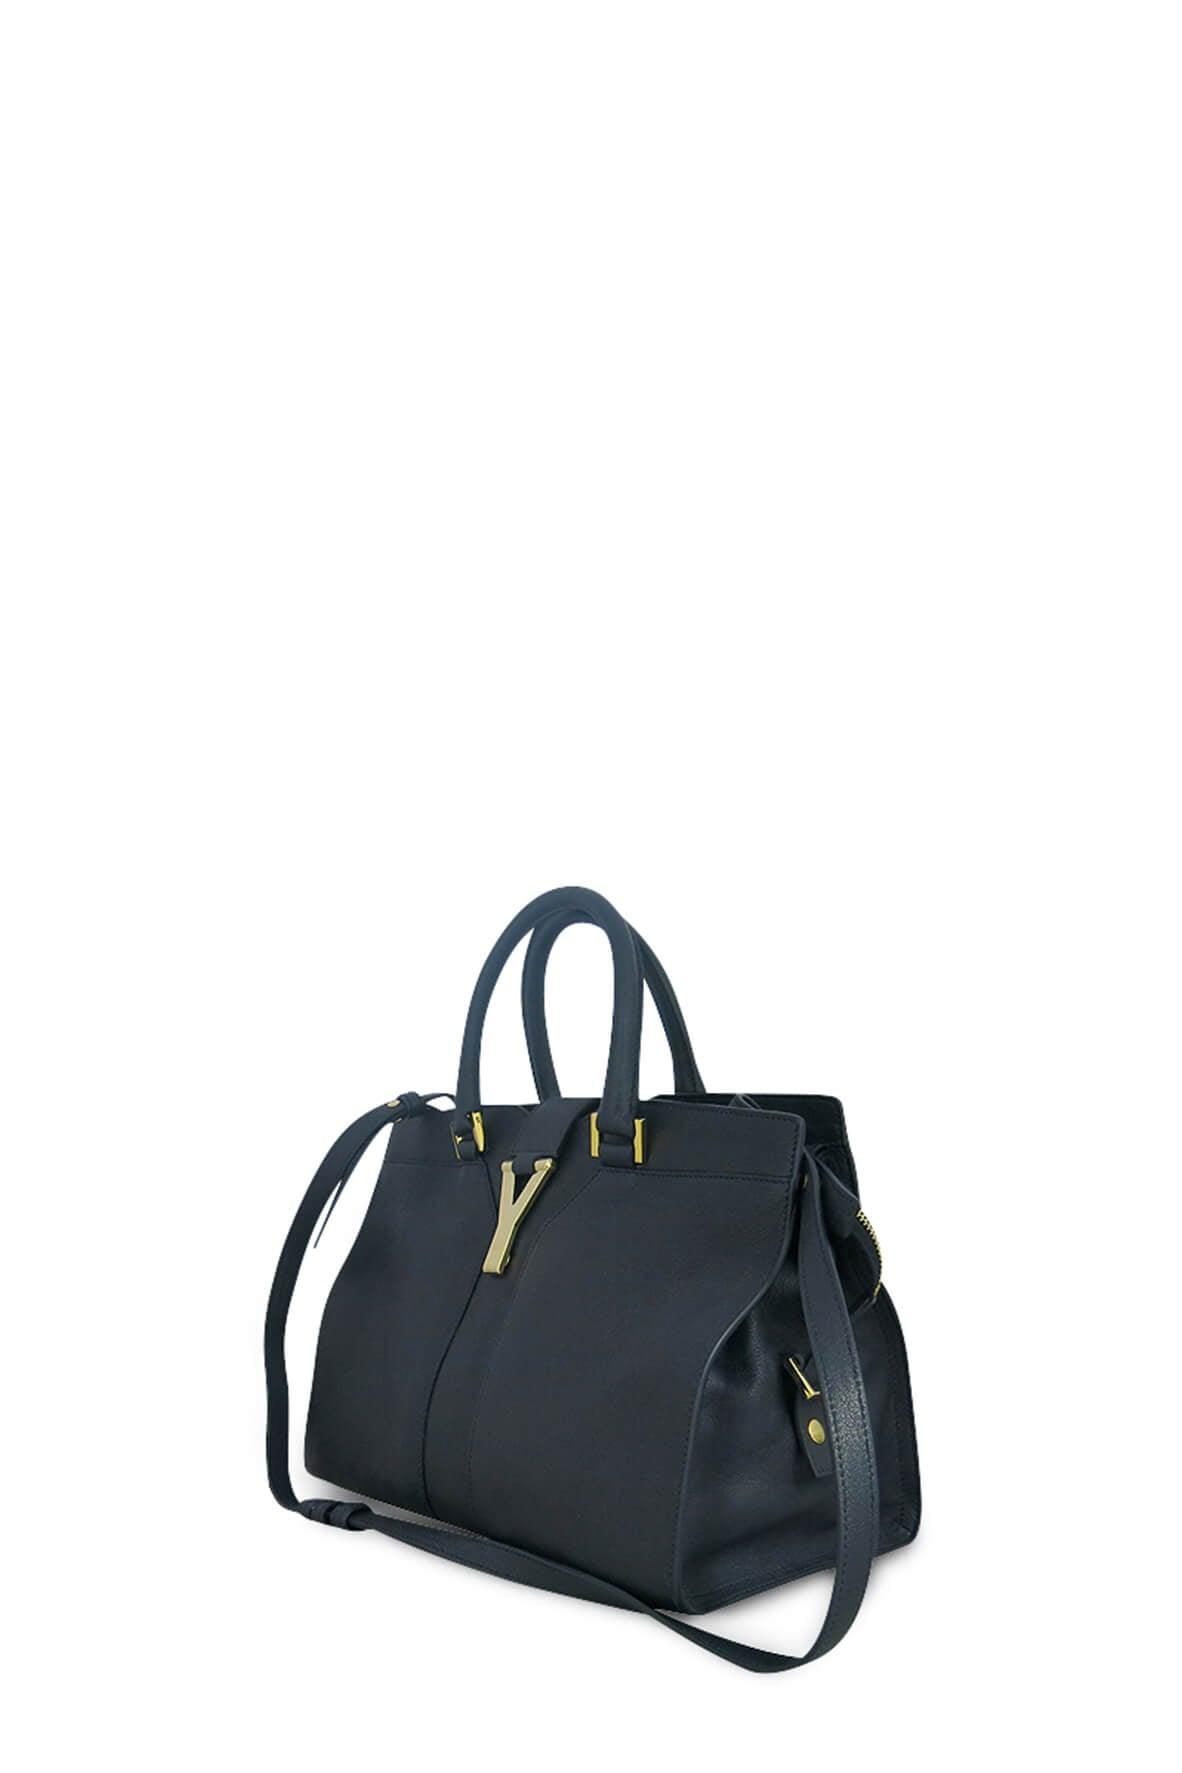 Saint Laurent Small Cabas Chyc Tote